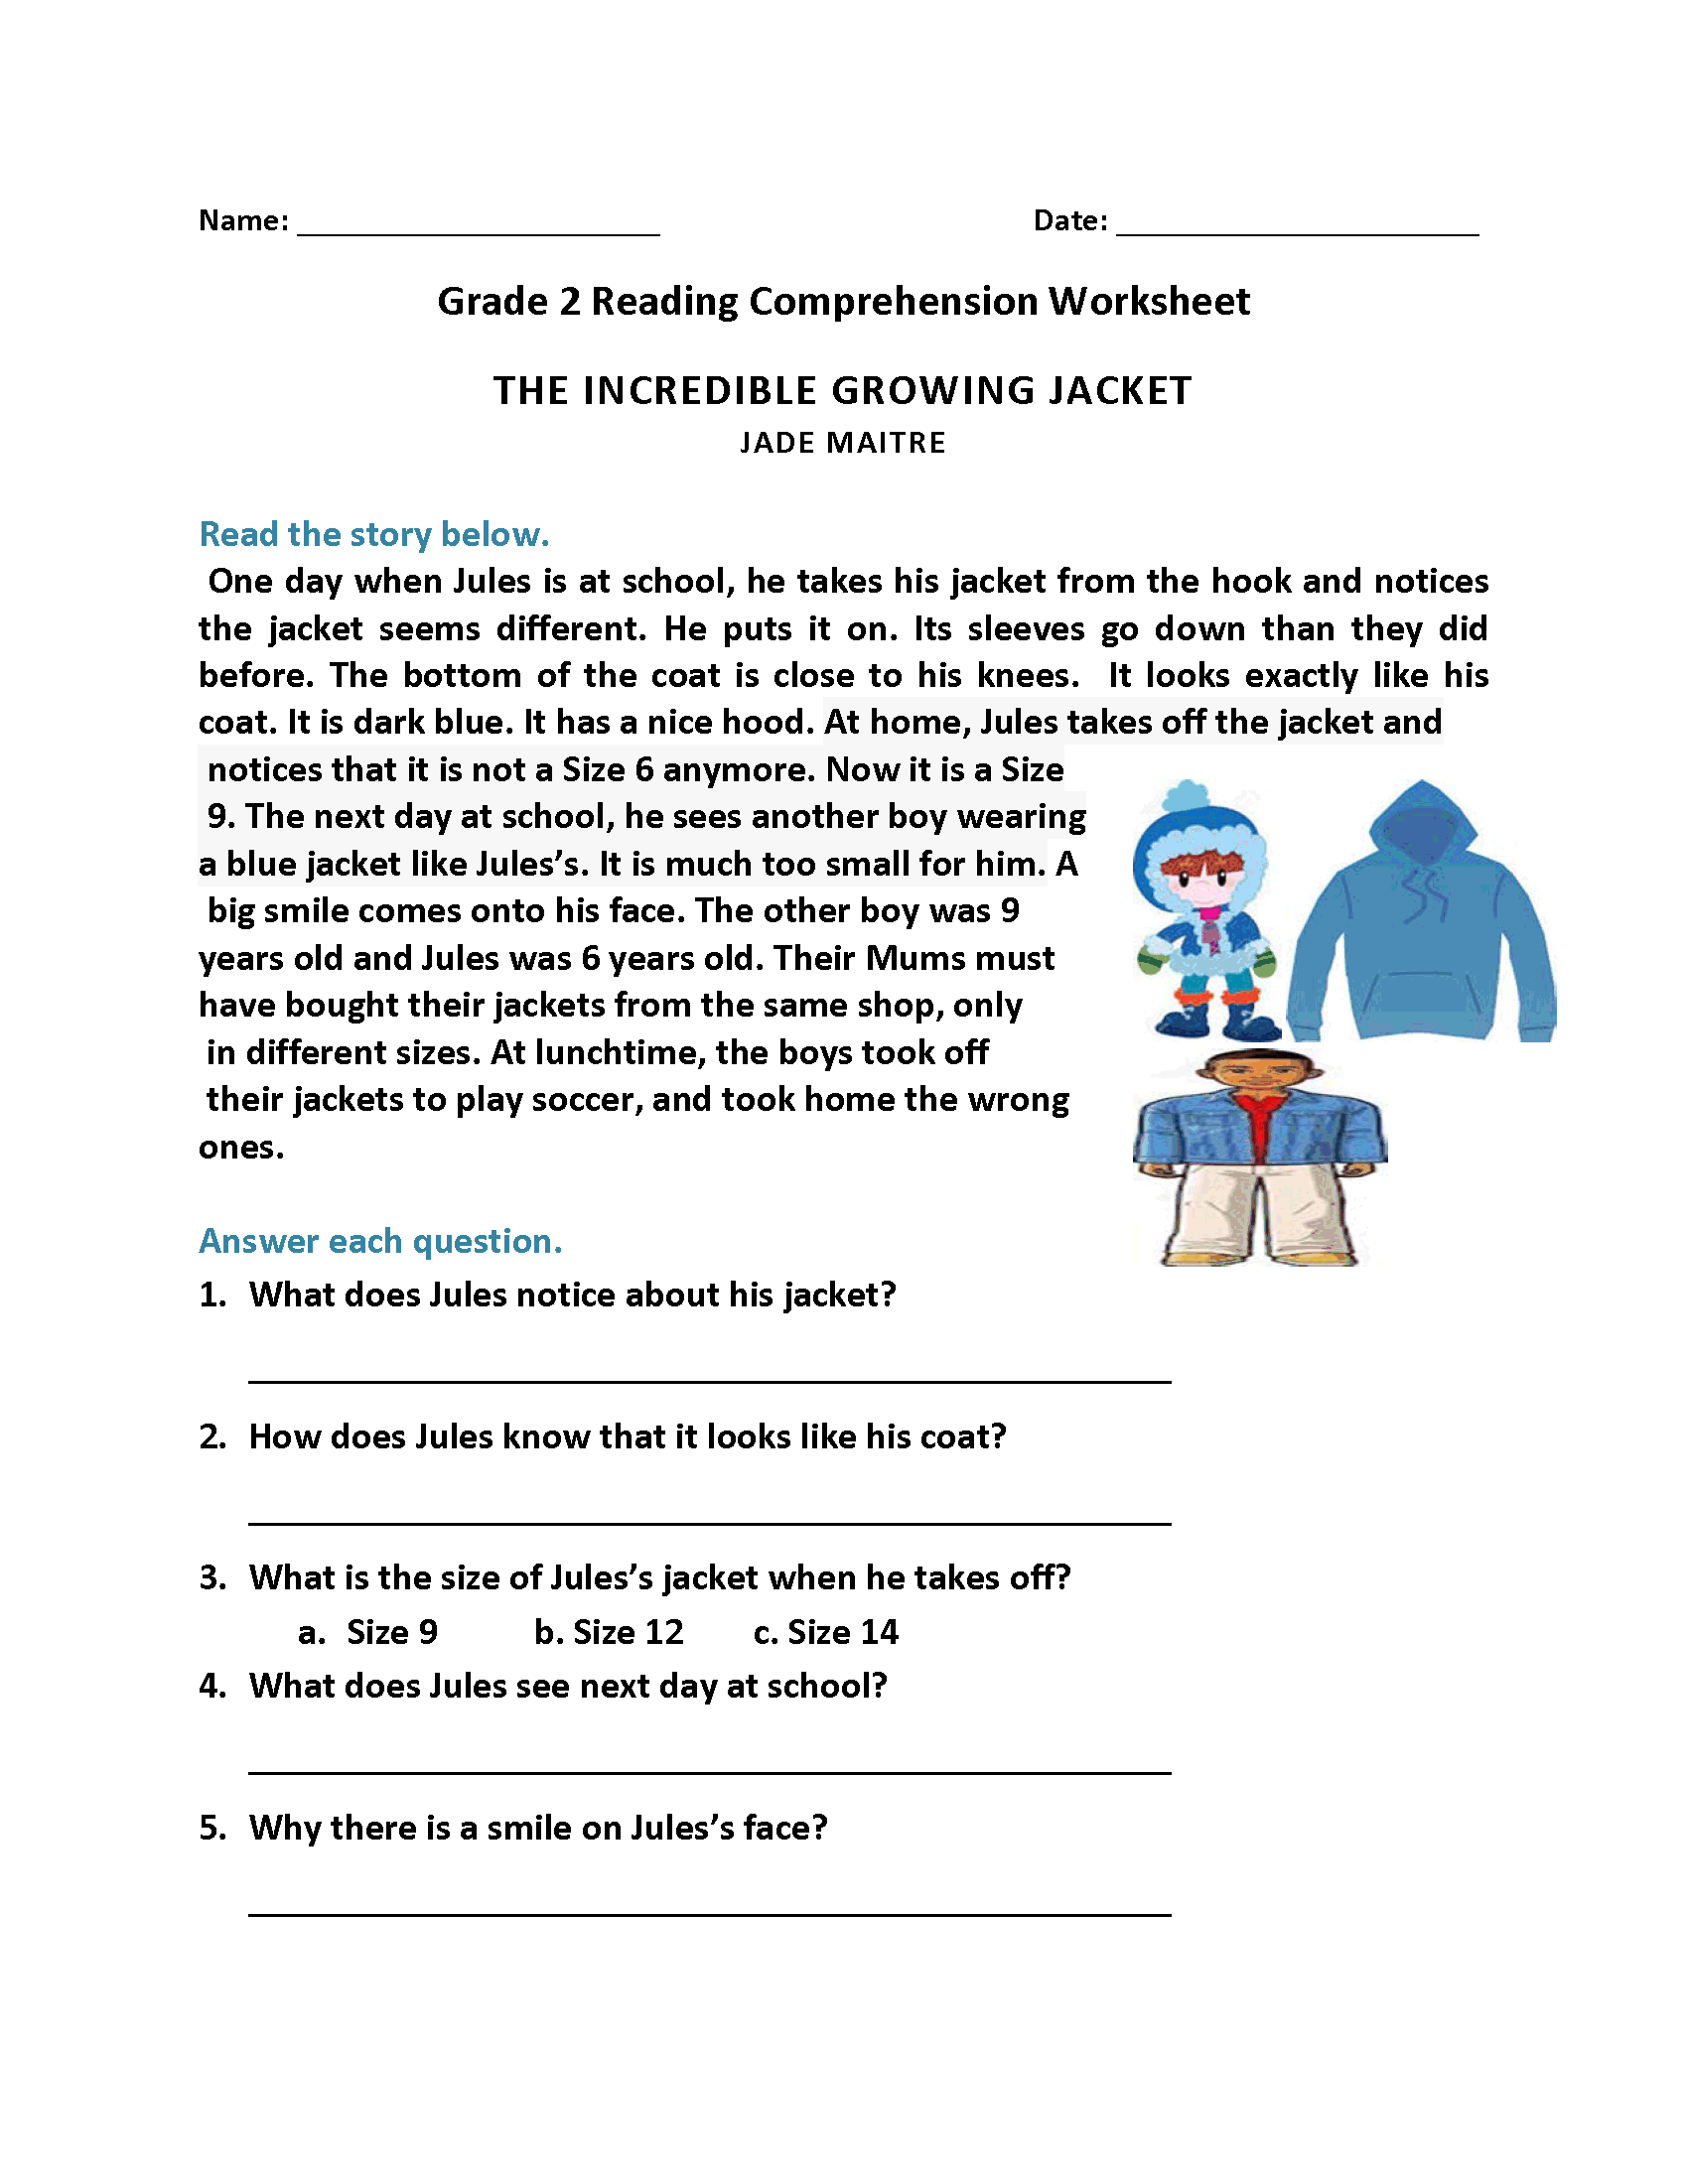 reading-comprehension-multiple-choice-worksheets